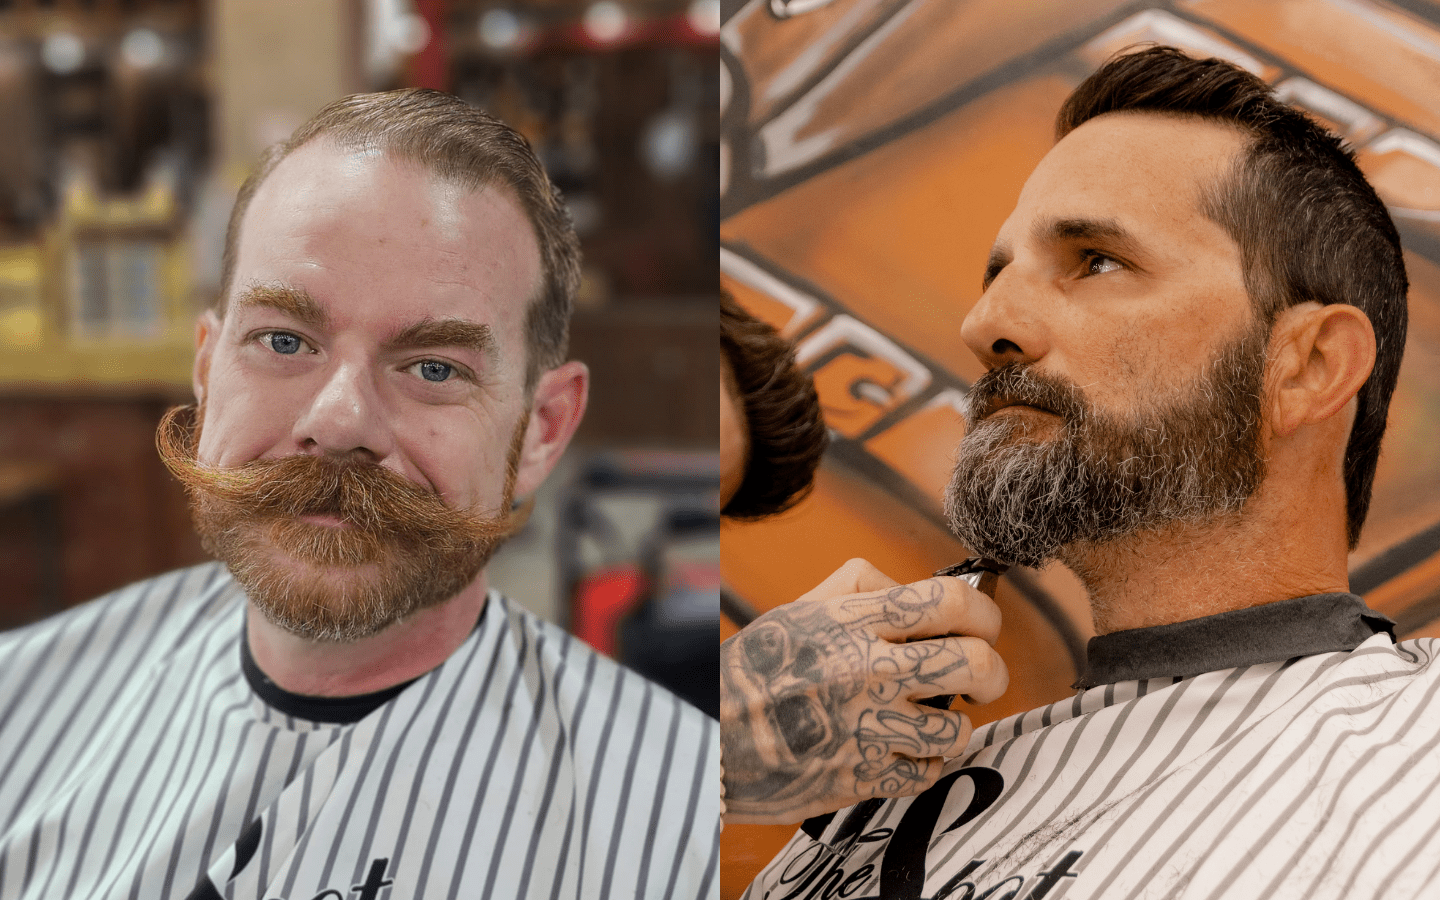 a-person-is-getting-their-beard-trim-by-another-person